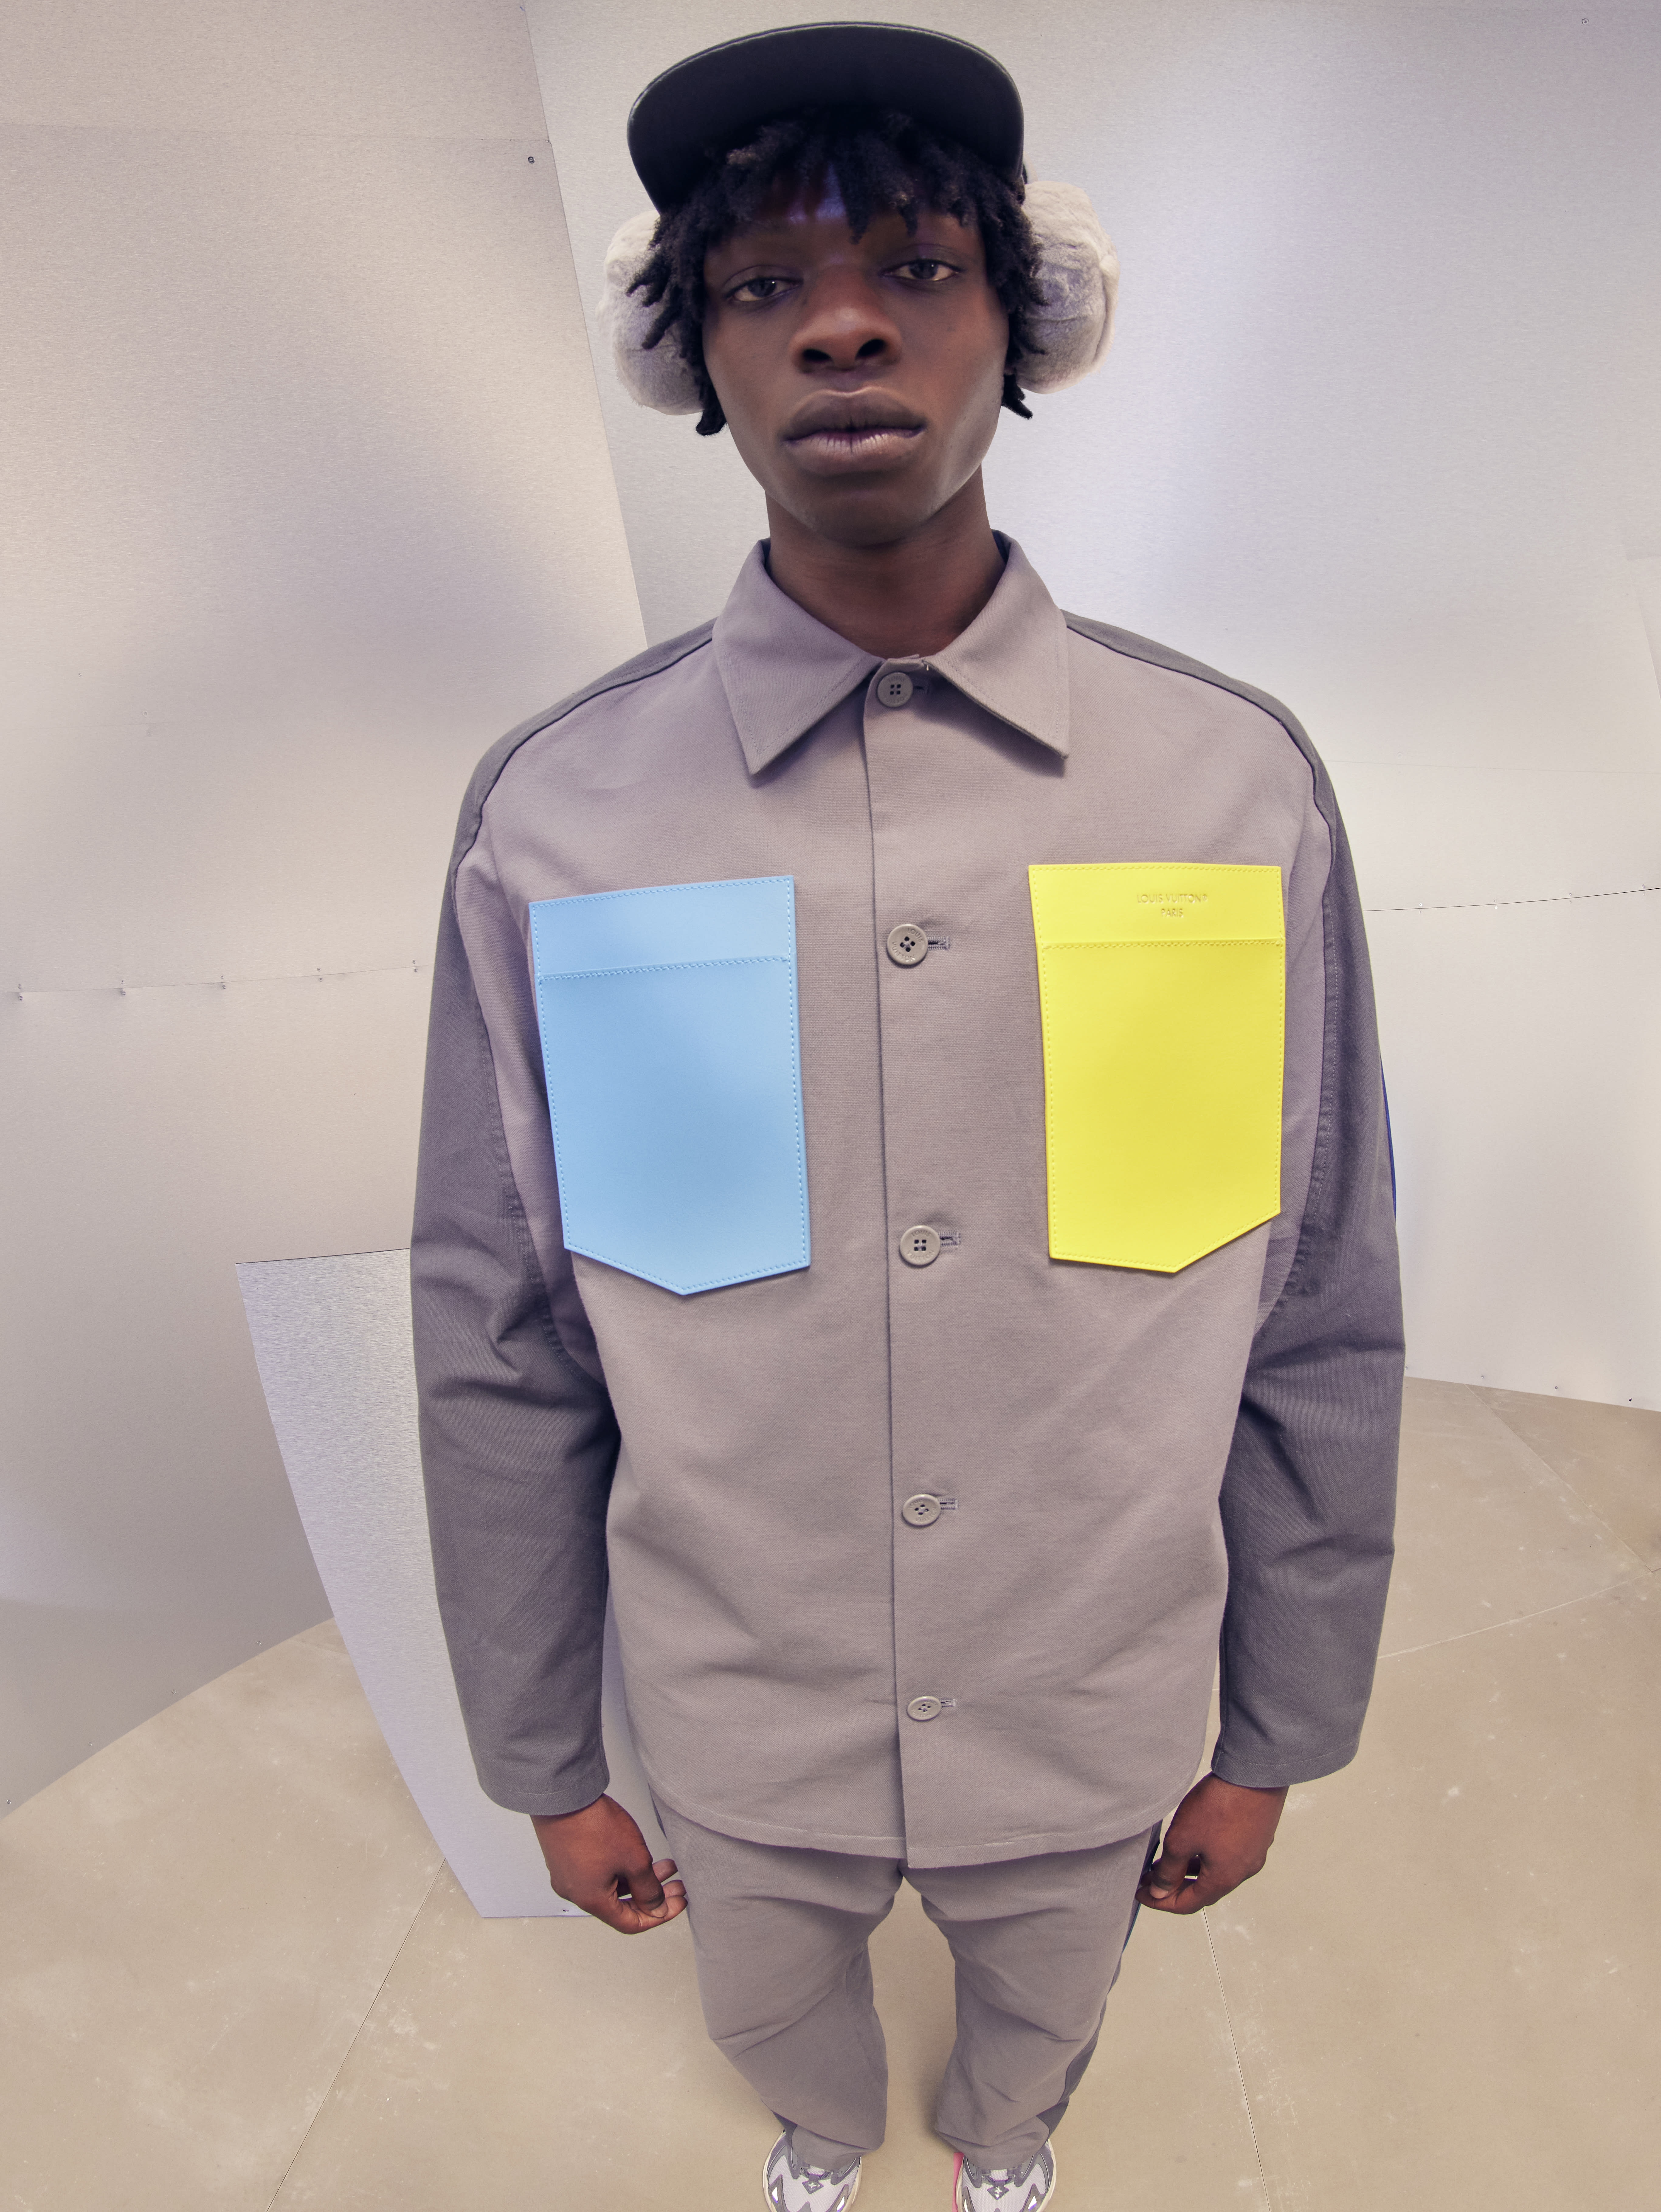 Louis Vuitton - Introducing the Staples Edition from Virgil Abloh as part  of his LouisVuitton Fall-Winter 2019 Men's Pre-Collection. The new capsule  refines the essential garments and accessories that form the foundation